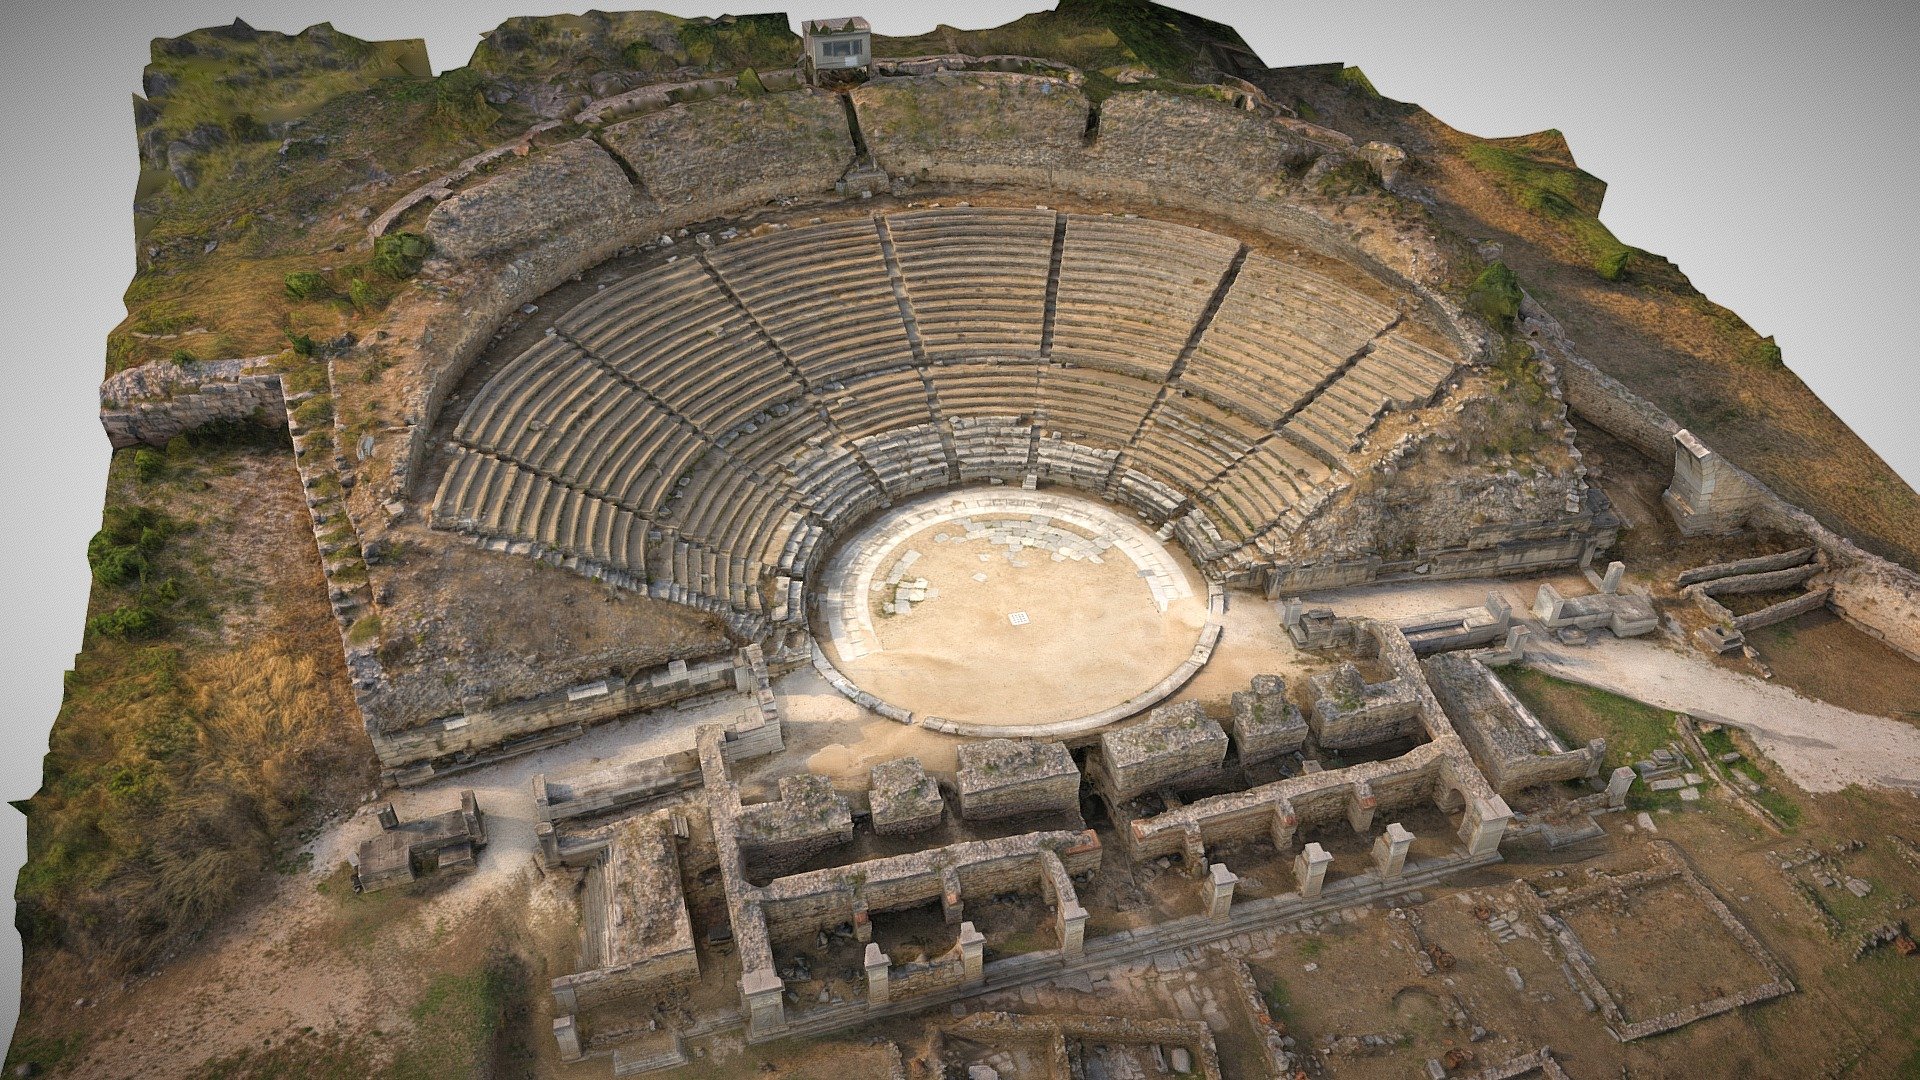 3D reconstruction of the 4th-century BCE theatre built by Philip II, one of the largest built in Greece, has been excavated and been partially reconstructed. 

Updated with new reconstructed model 3d model